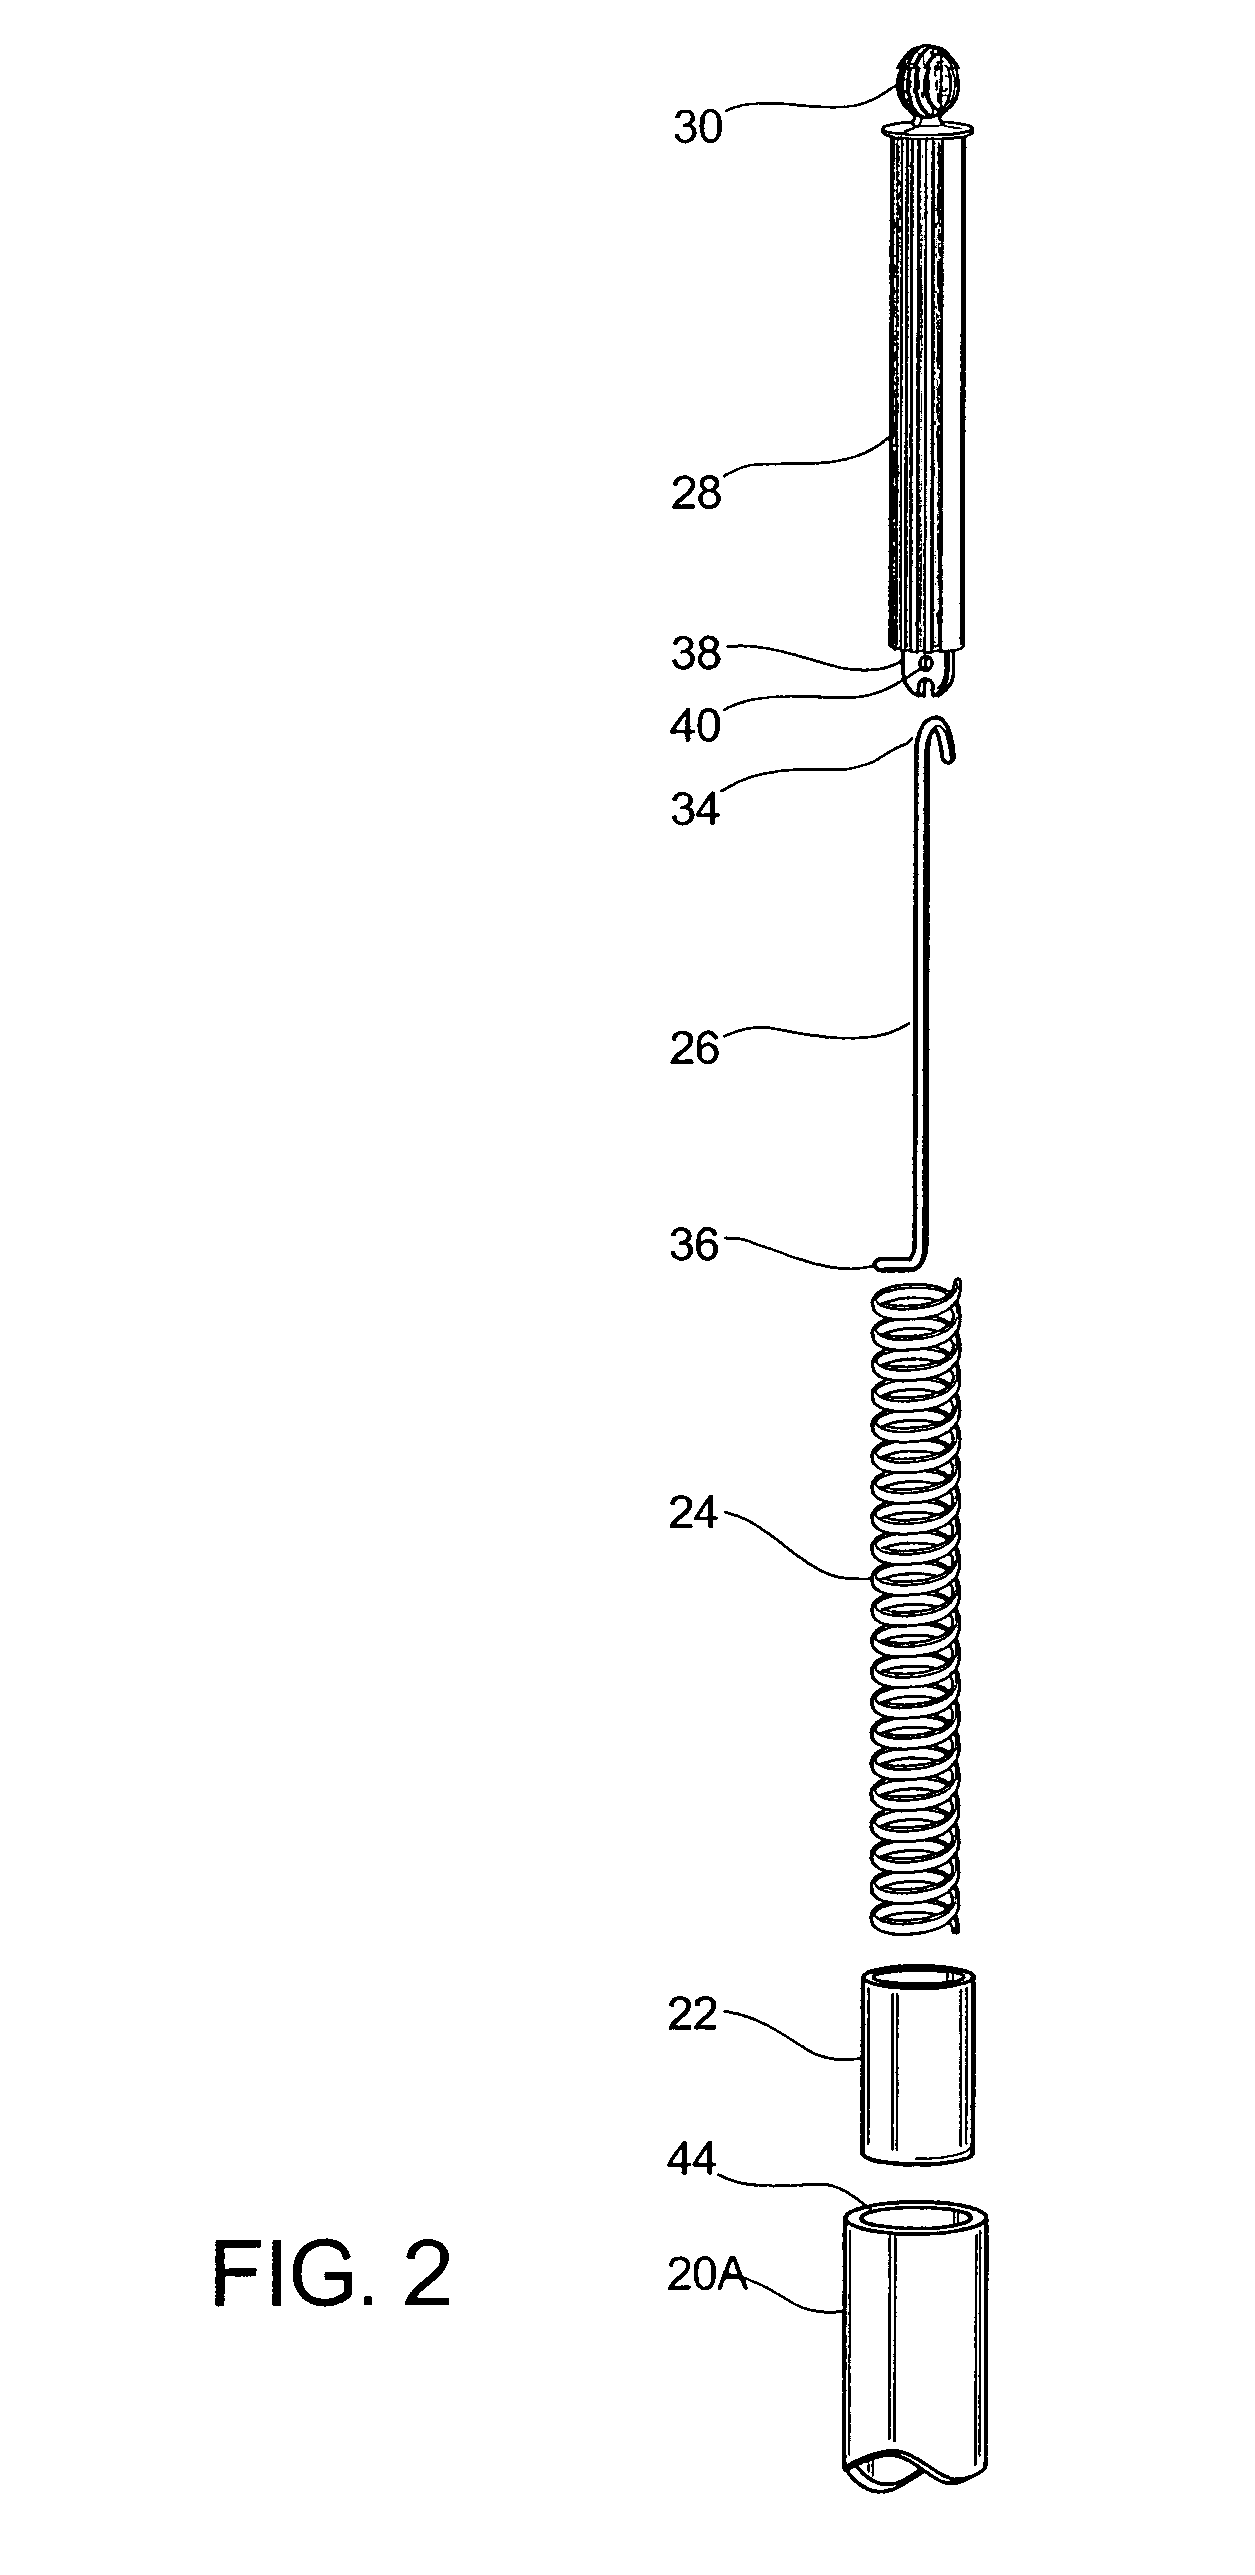 Partition mount with integrated plunger assembly